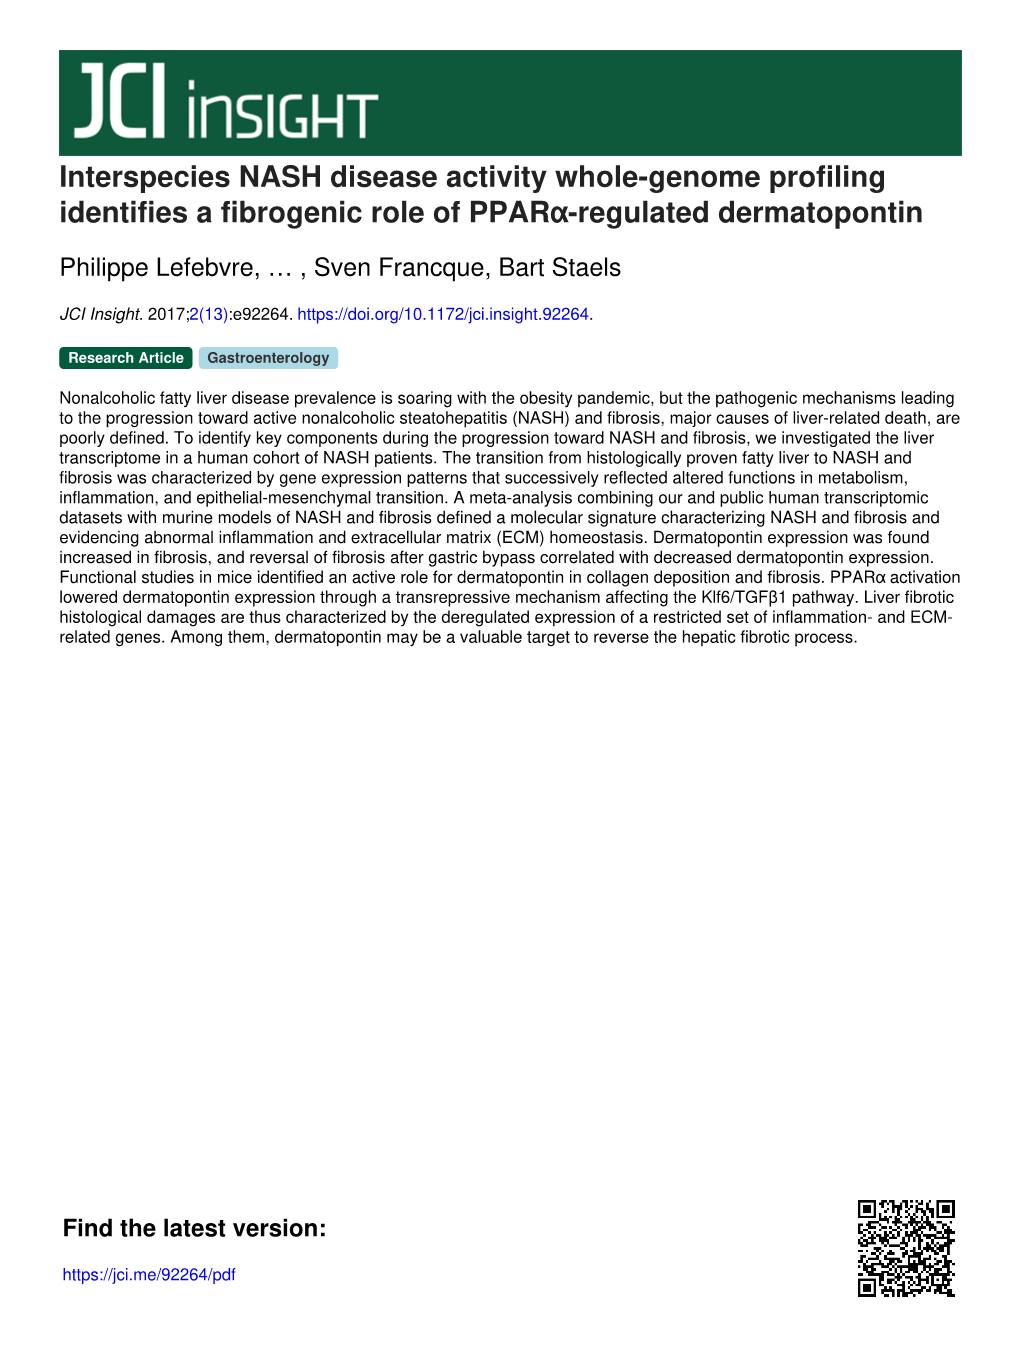 Interspecies NASH Disease Activity Whole-Genome Profiling Identifies a Fibrogenic Role of Pparα-Regulated Dermatopontin